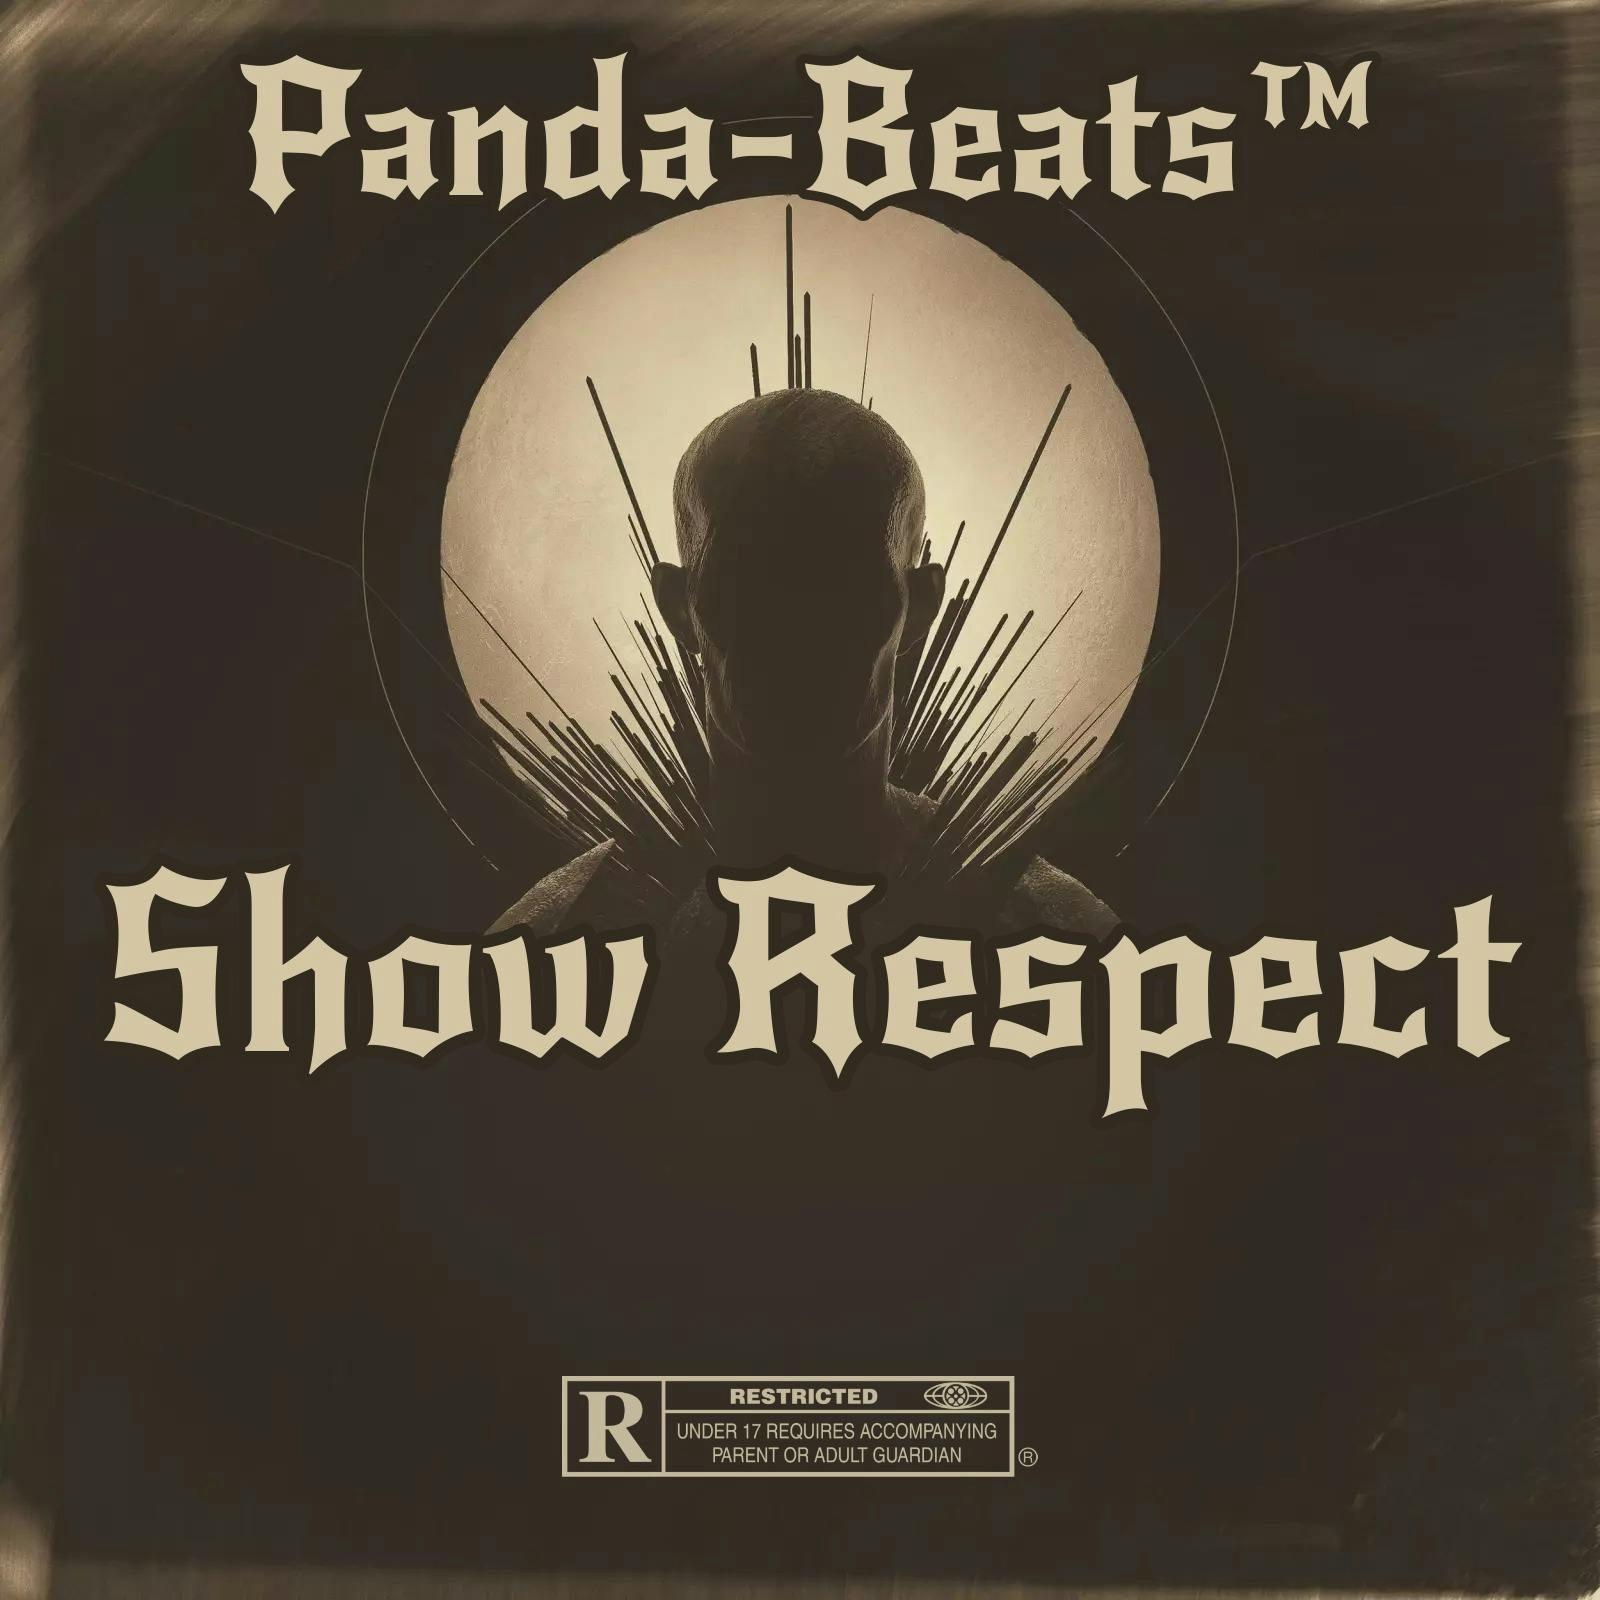 Show Respect "Official song"